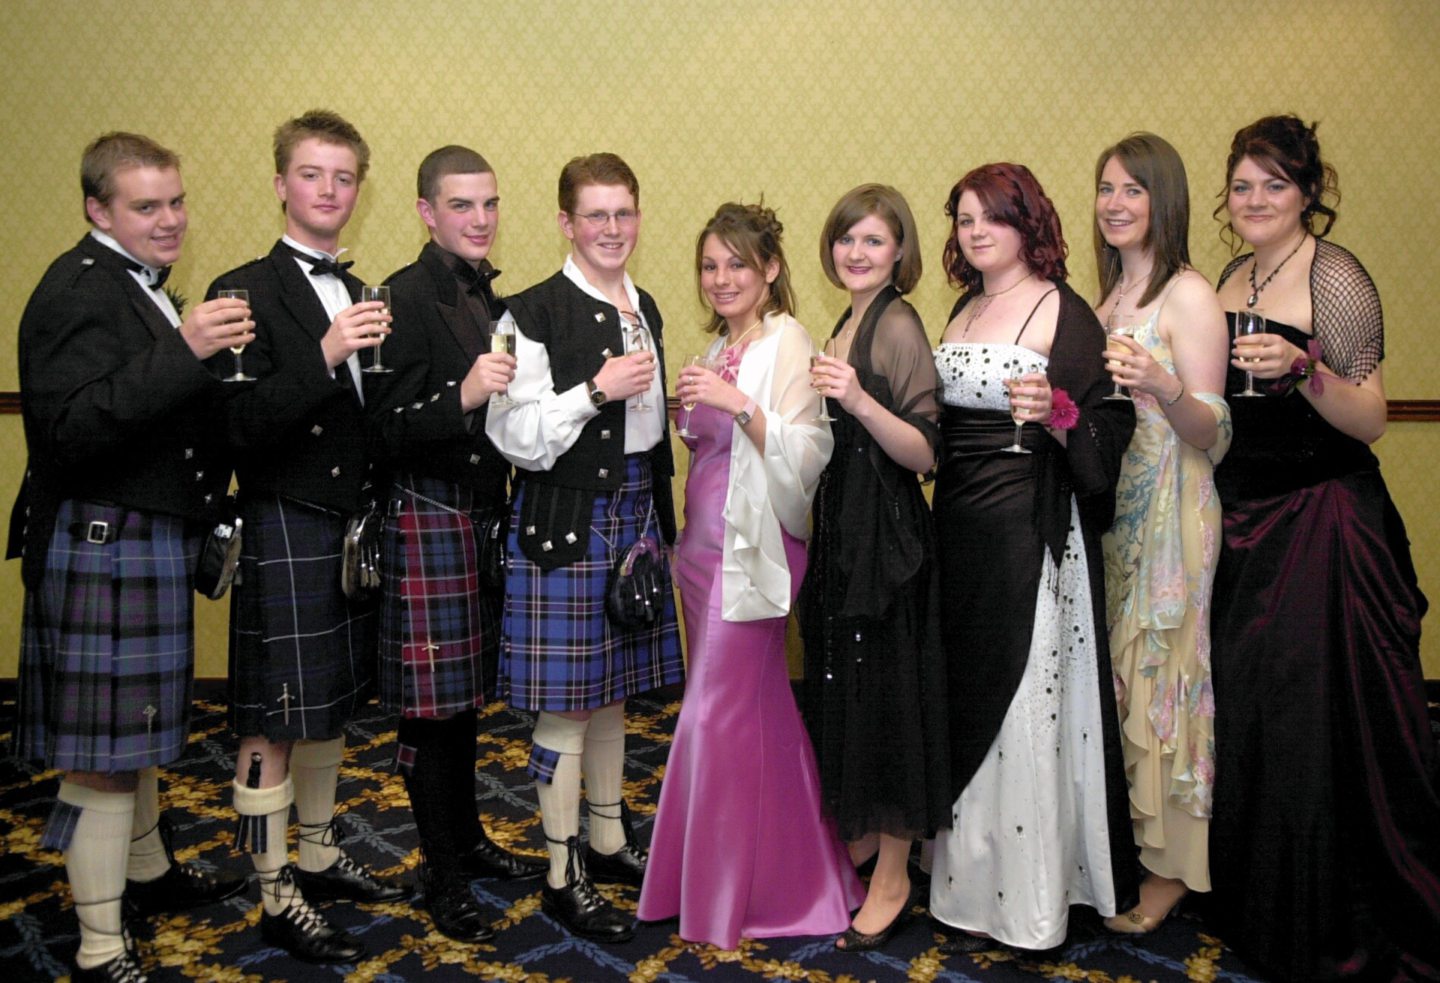 Grammar pupils' prom at the Queen's Hotel in 2005.